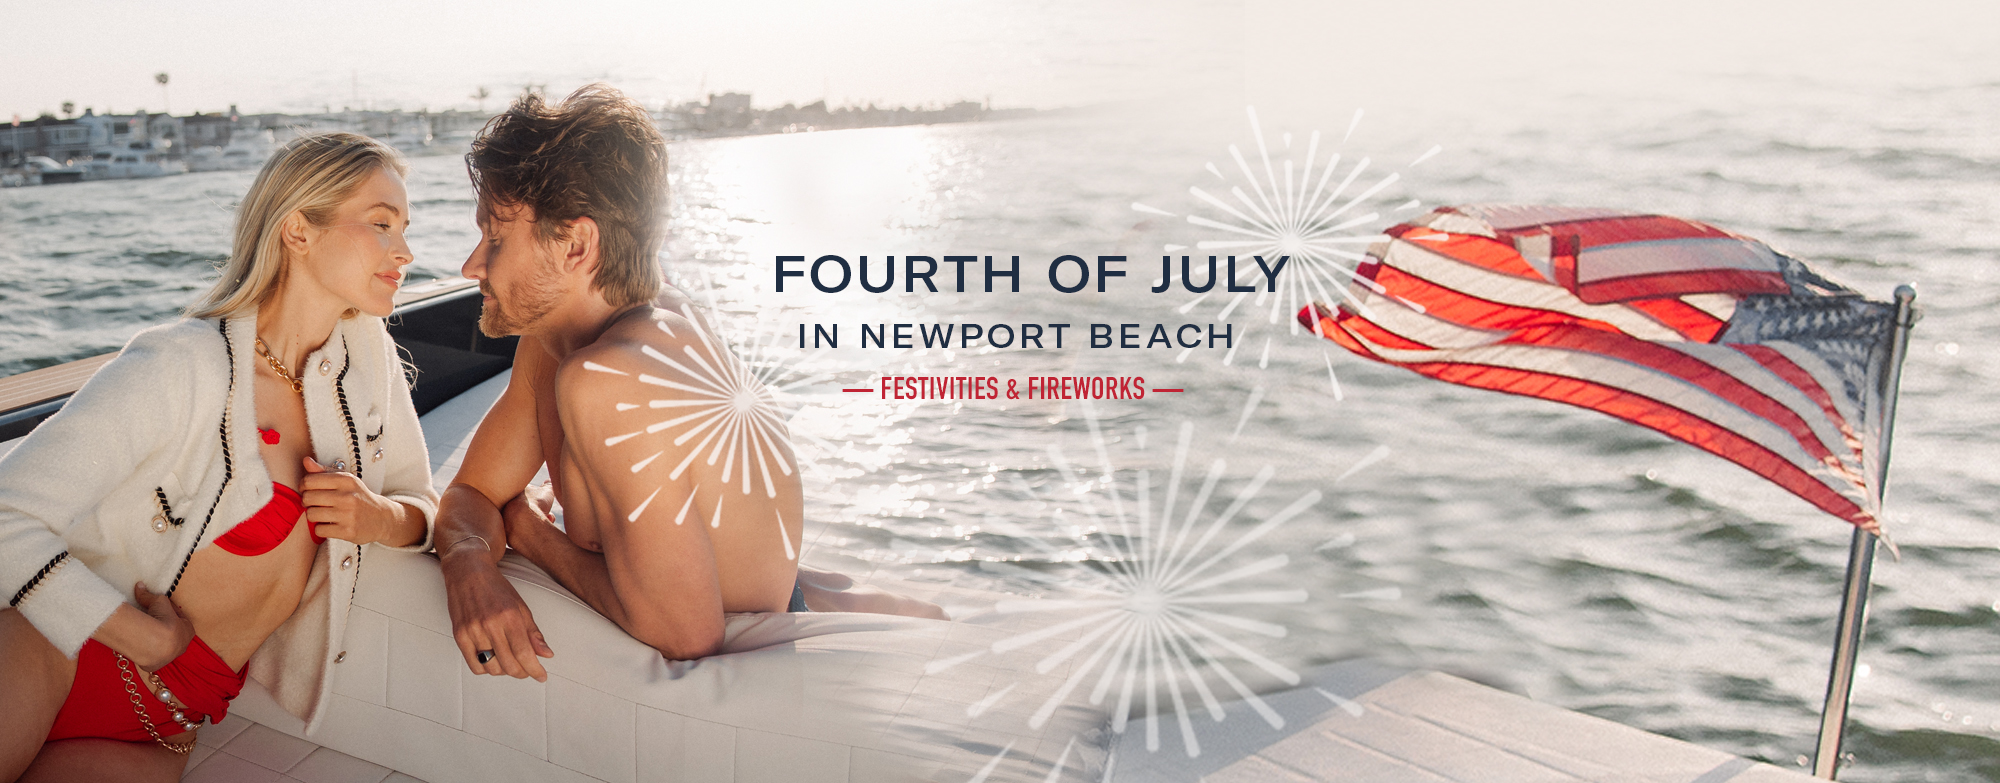 Fourth of July Graphic Desktop